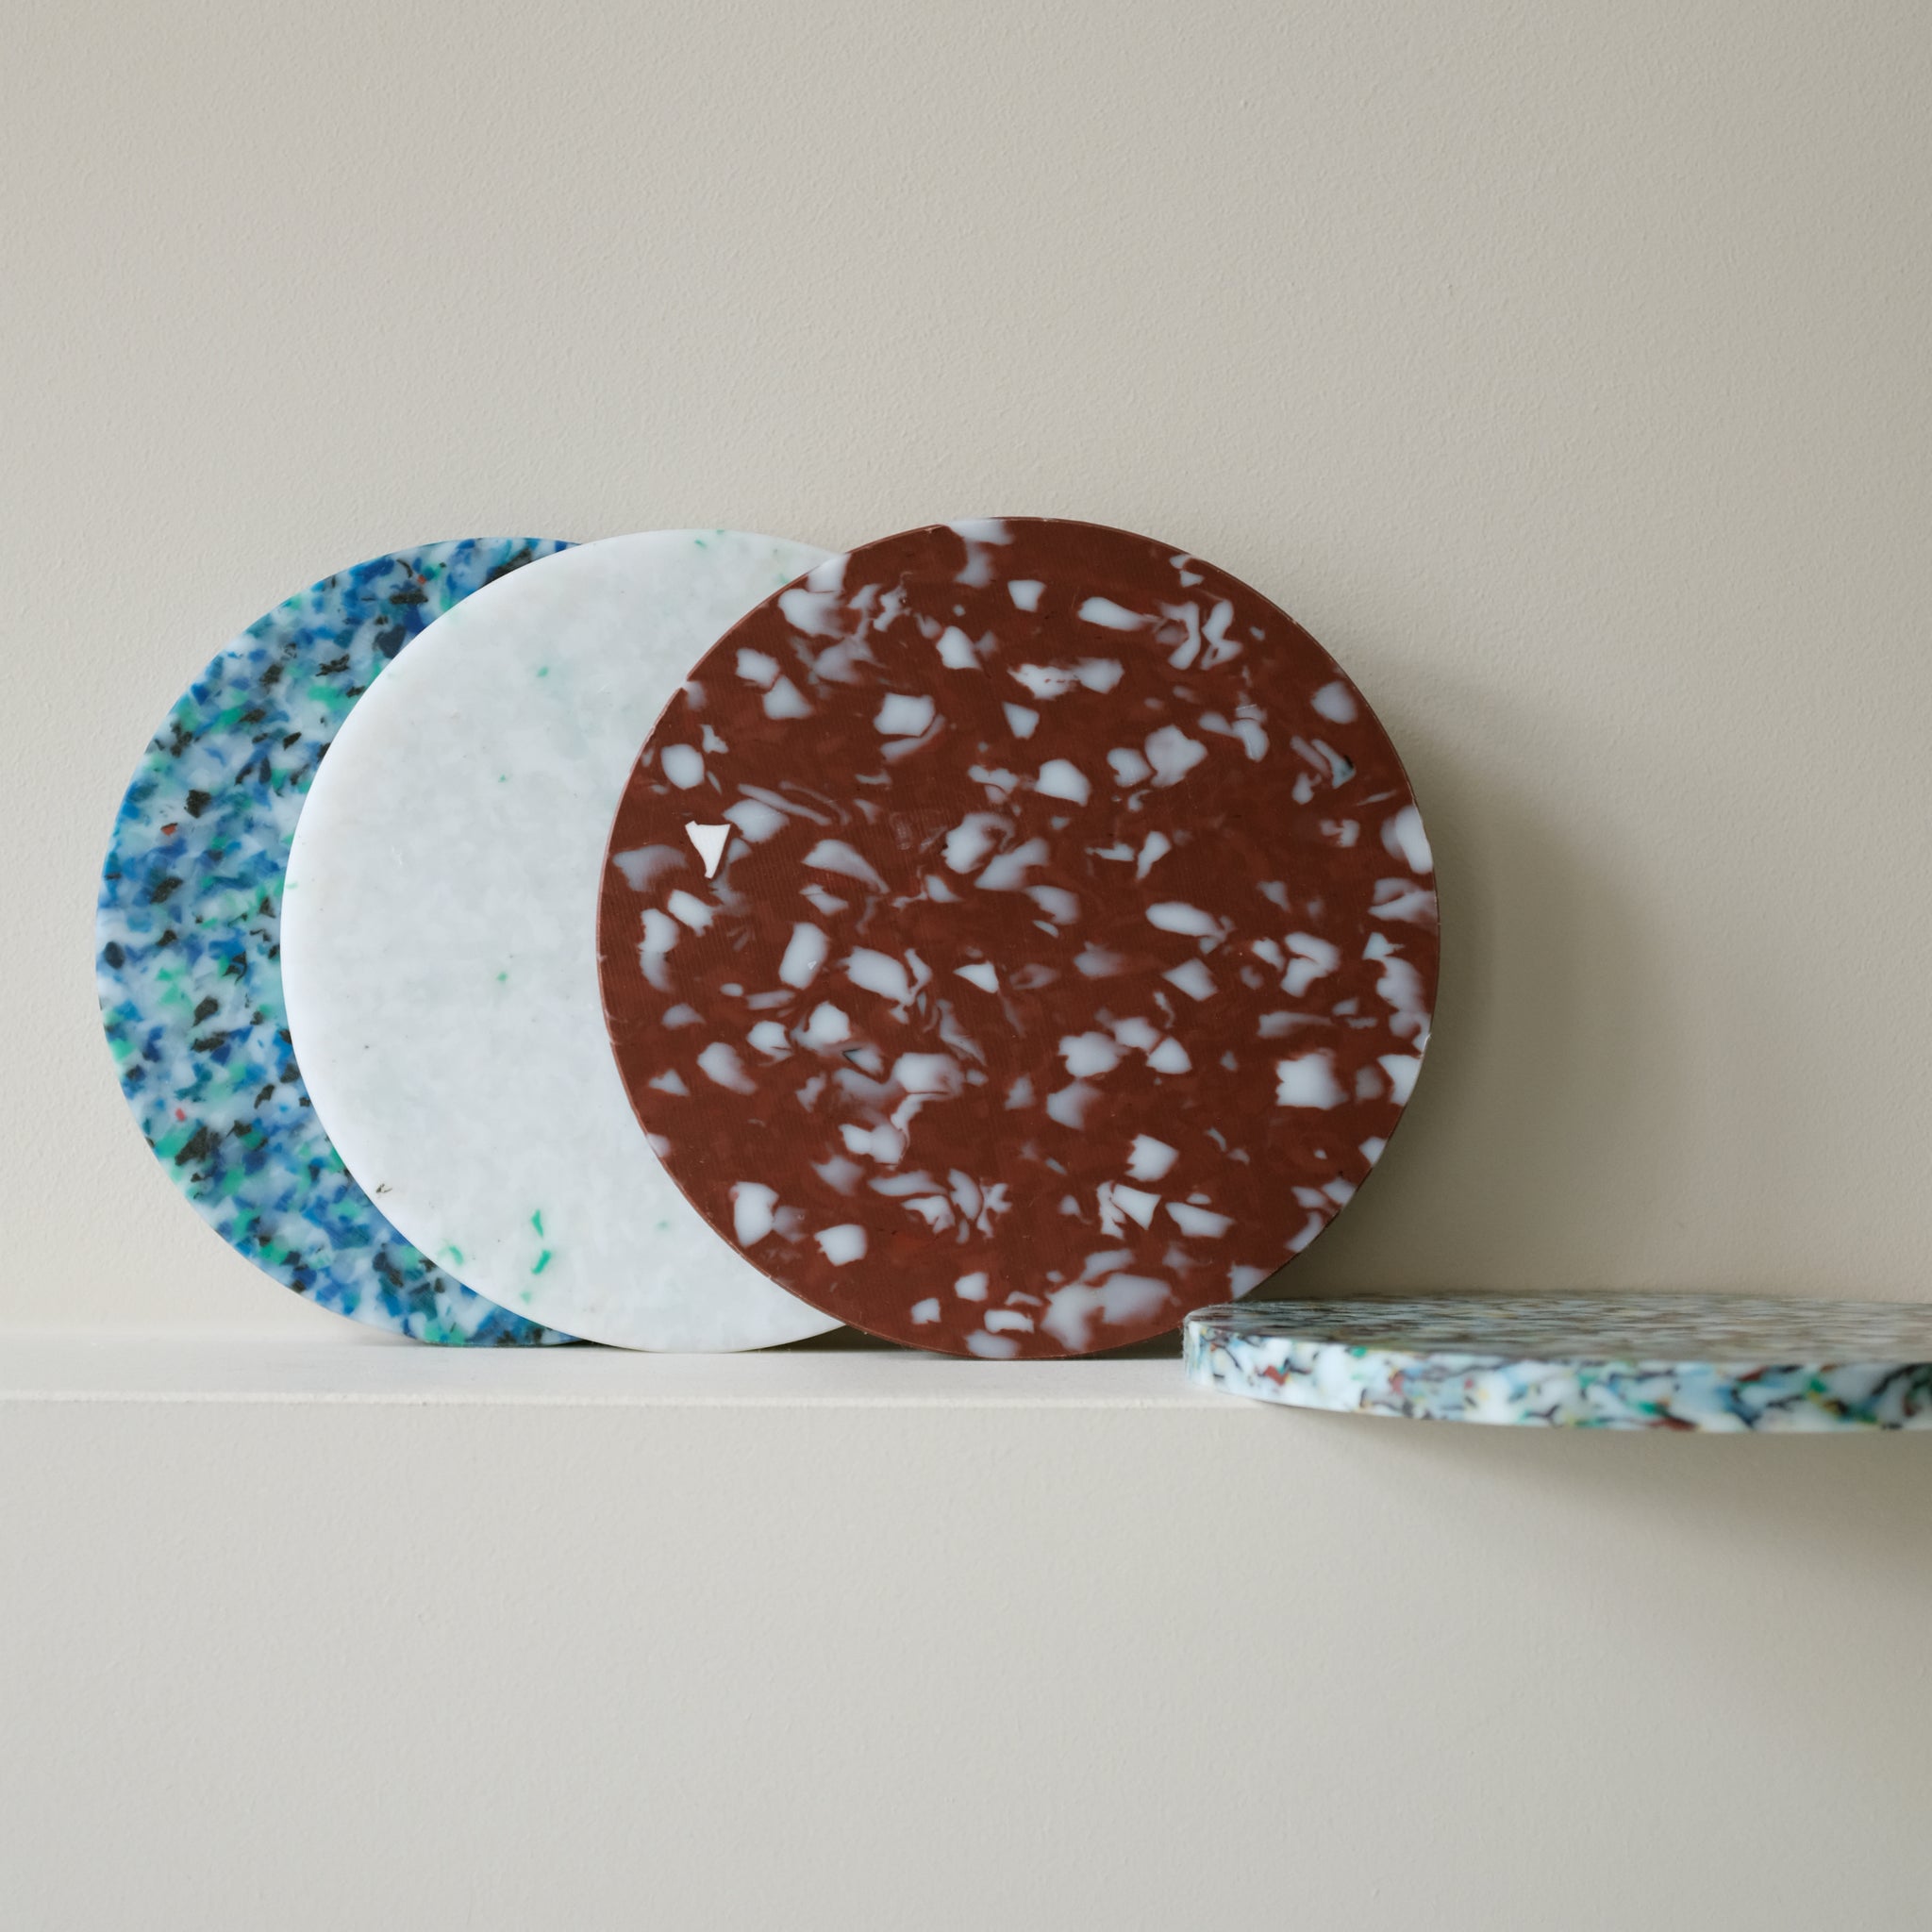 VARIOUS CIRCLE CHARCUTERIE CUTTING BOARDS BY THE MINIMONO PROJECT - BRAND FOR ECO FRIENDLY - PLAYFUL - MULTI FUNCTIONAL - SUSTAINABLE - HIGH QUALITY - DESIGN FURNITURE FROM RECYCLED PLASTIC FOR BOTH ADULT AND CHILDREN MADE IN BERLIN GERMANY